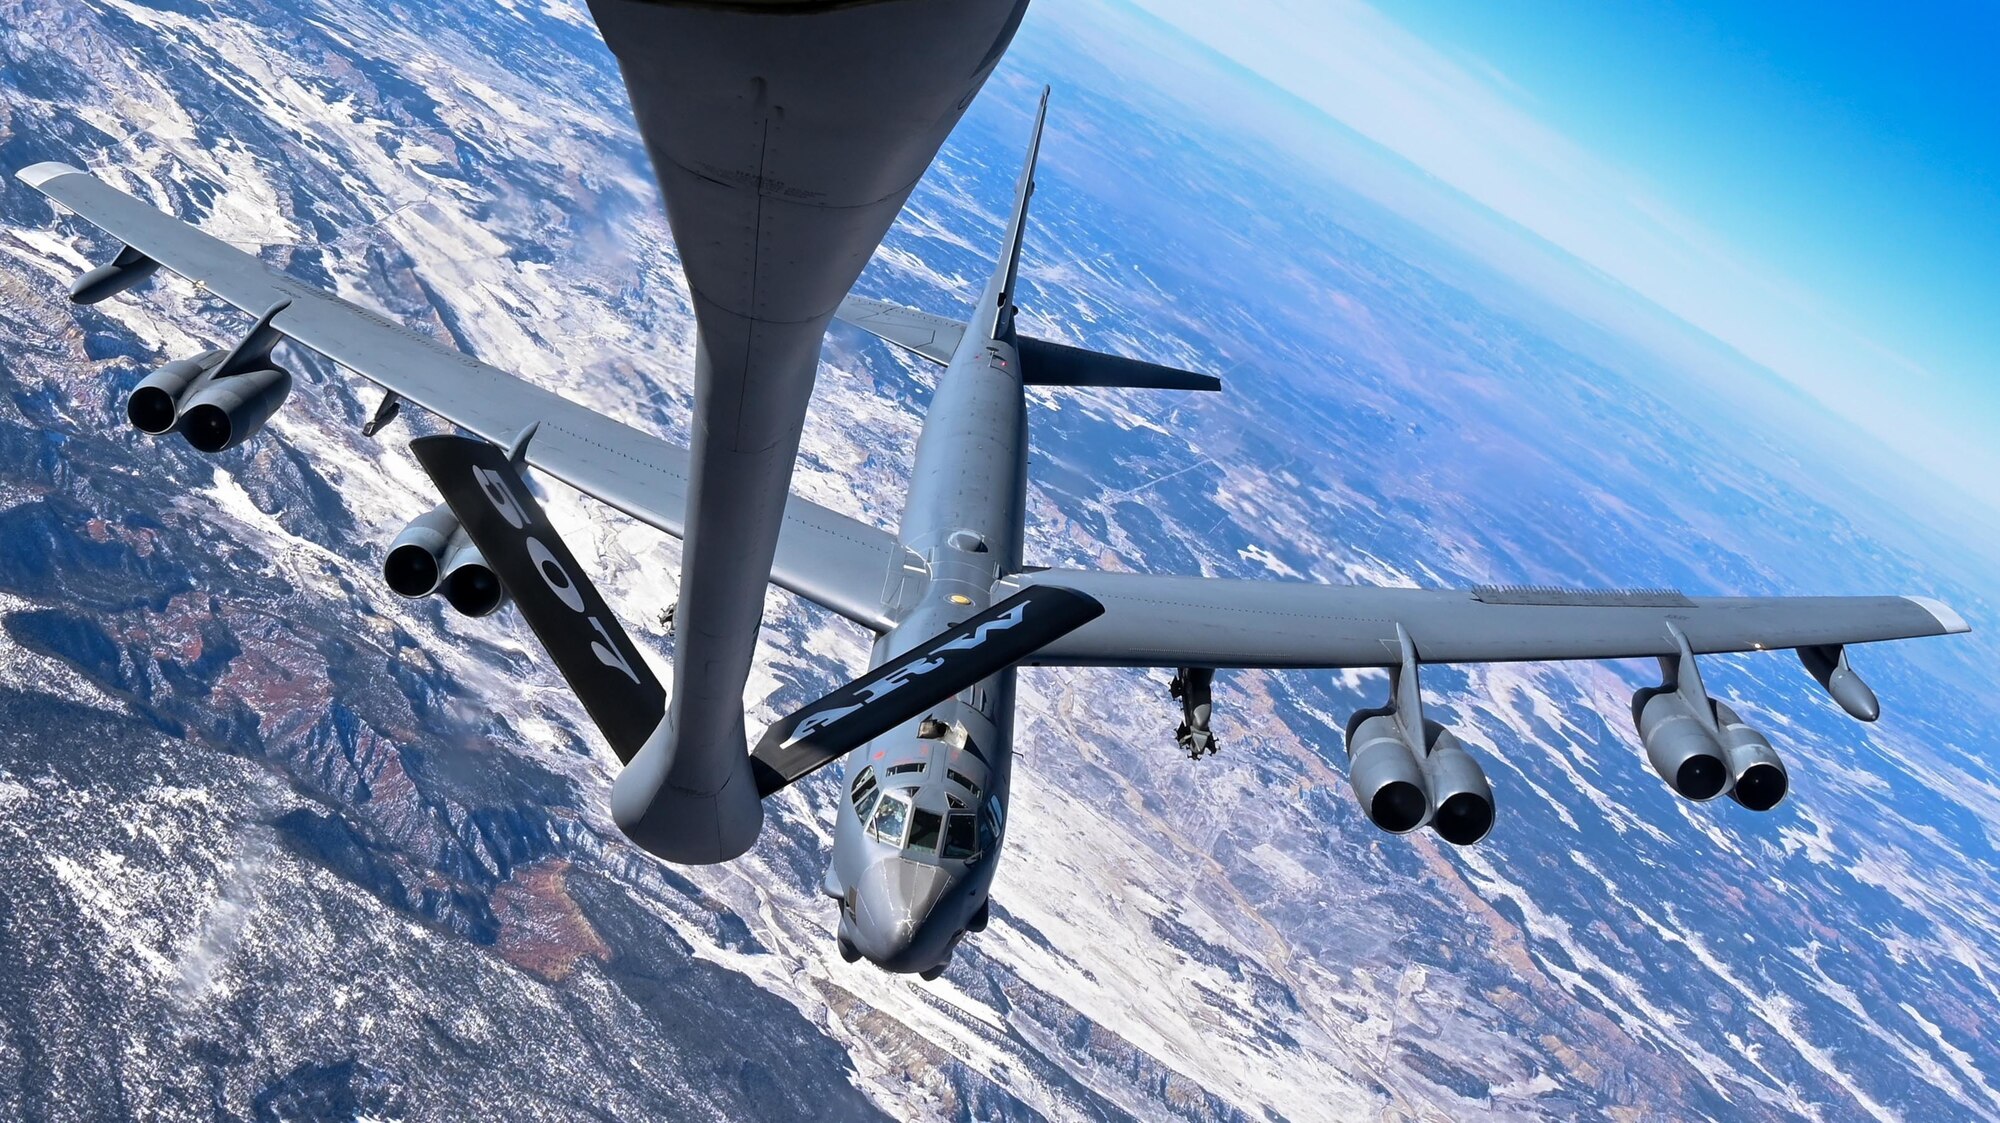 A B-52 Stratofortress assigned to the 96th Bomb Squadron Barksdale Air Force Base, Louisiana, prepares to refuel with a KC-135 Stratotanker assigned to the 465th Air Refueling Squadron, Tinker AFB, Oklahoma, above the Rocky Mountains, Dec. 13, 2021. Aerial refueling allows aircraft to travel vast distances without landing to bring airpower anytime, anywhere around the world. (U.S. Air Force photo by 2nd Lt. Mary Begy